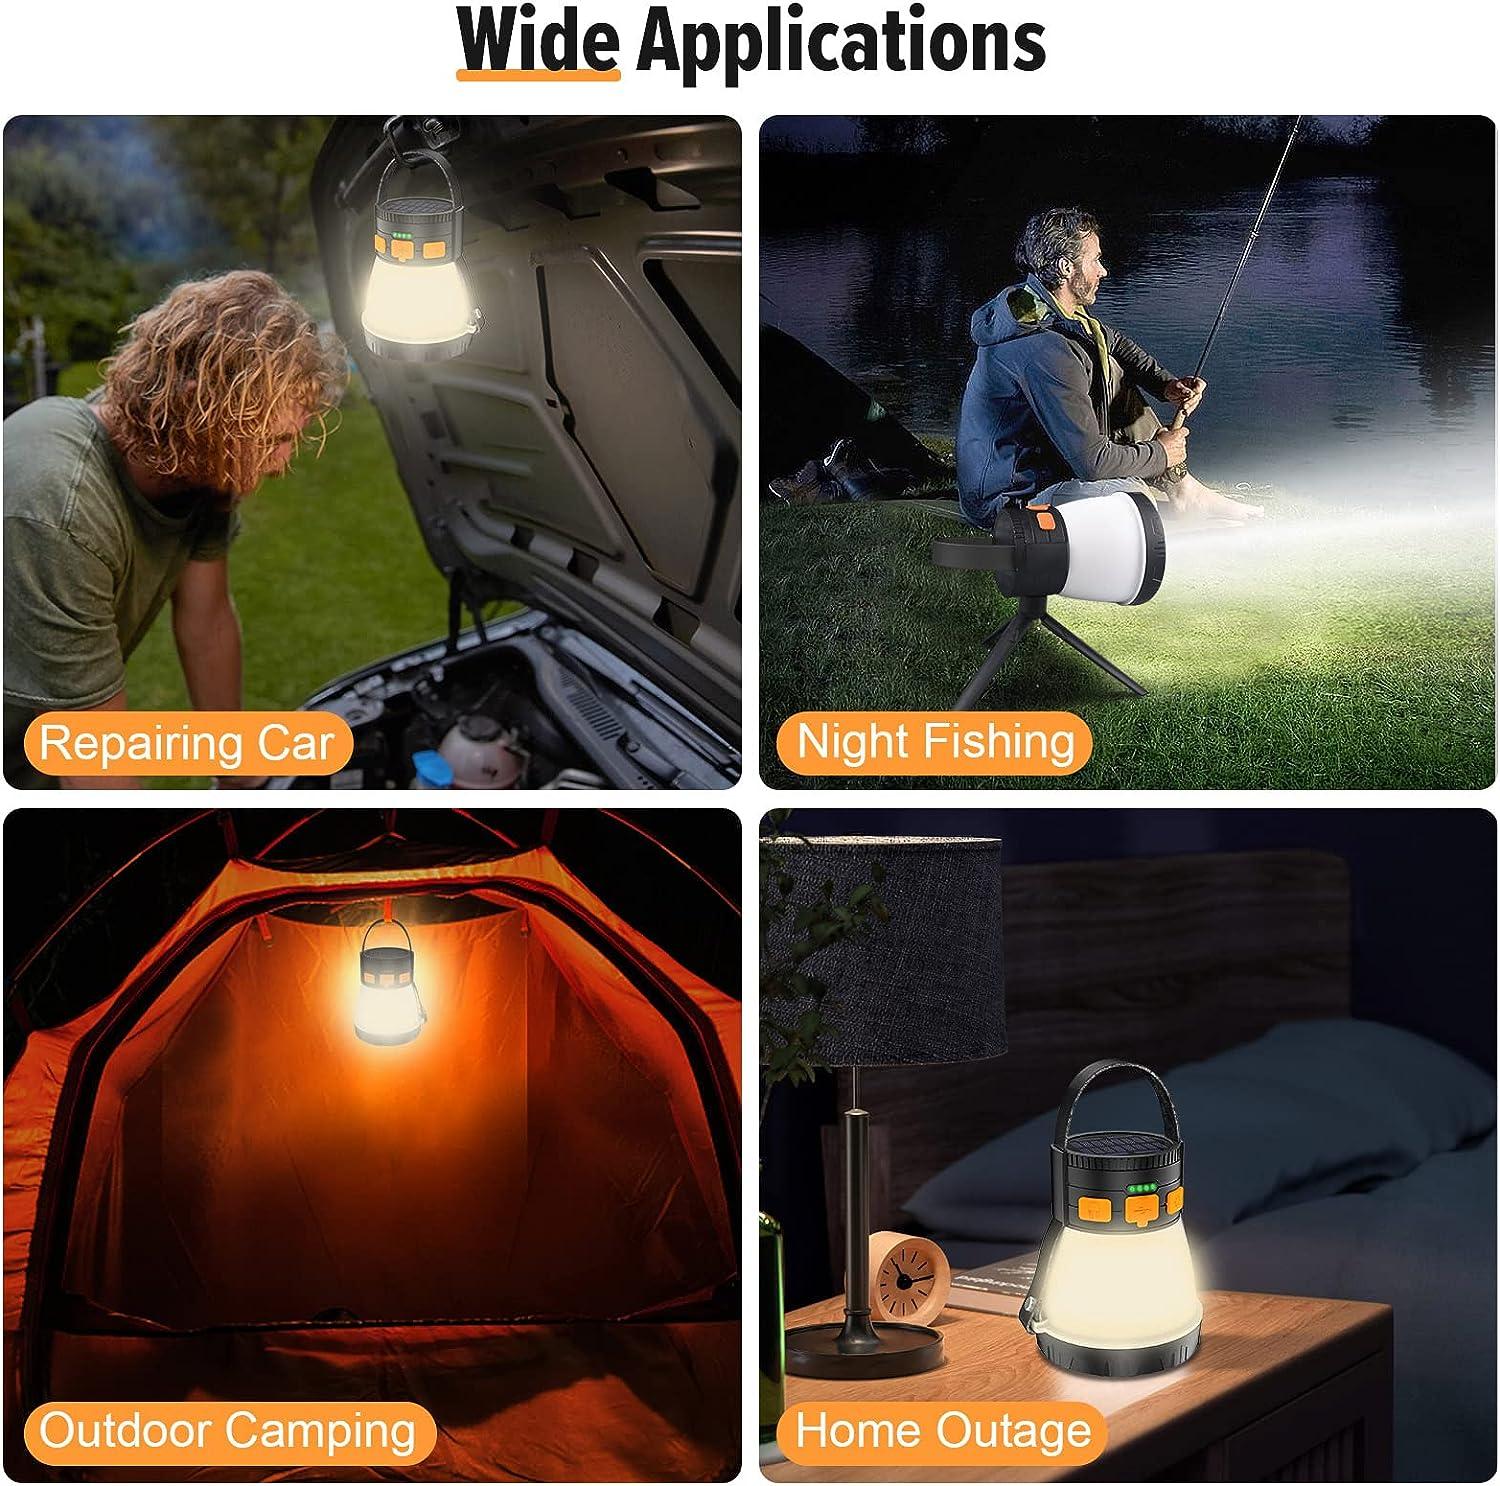 LED Camping Lantern, Rechargeable Solar Camping Light with 1500LM, 7200mAh  Capacity Battery Powered Waterproof Tent Light, Portable Bright RGB  Flashlight for Emergency, Outdoor Hiking, Power Outages